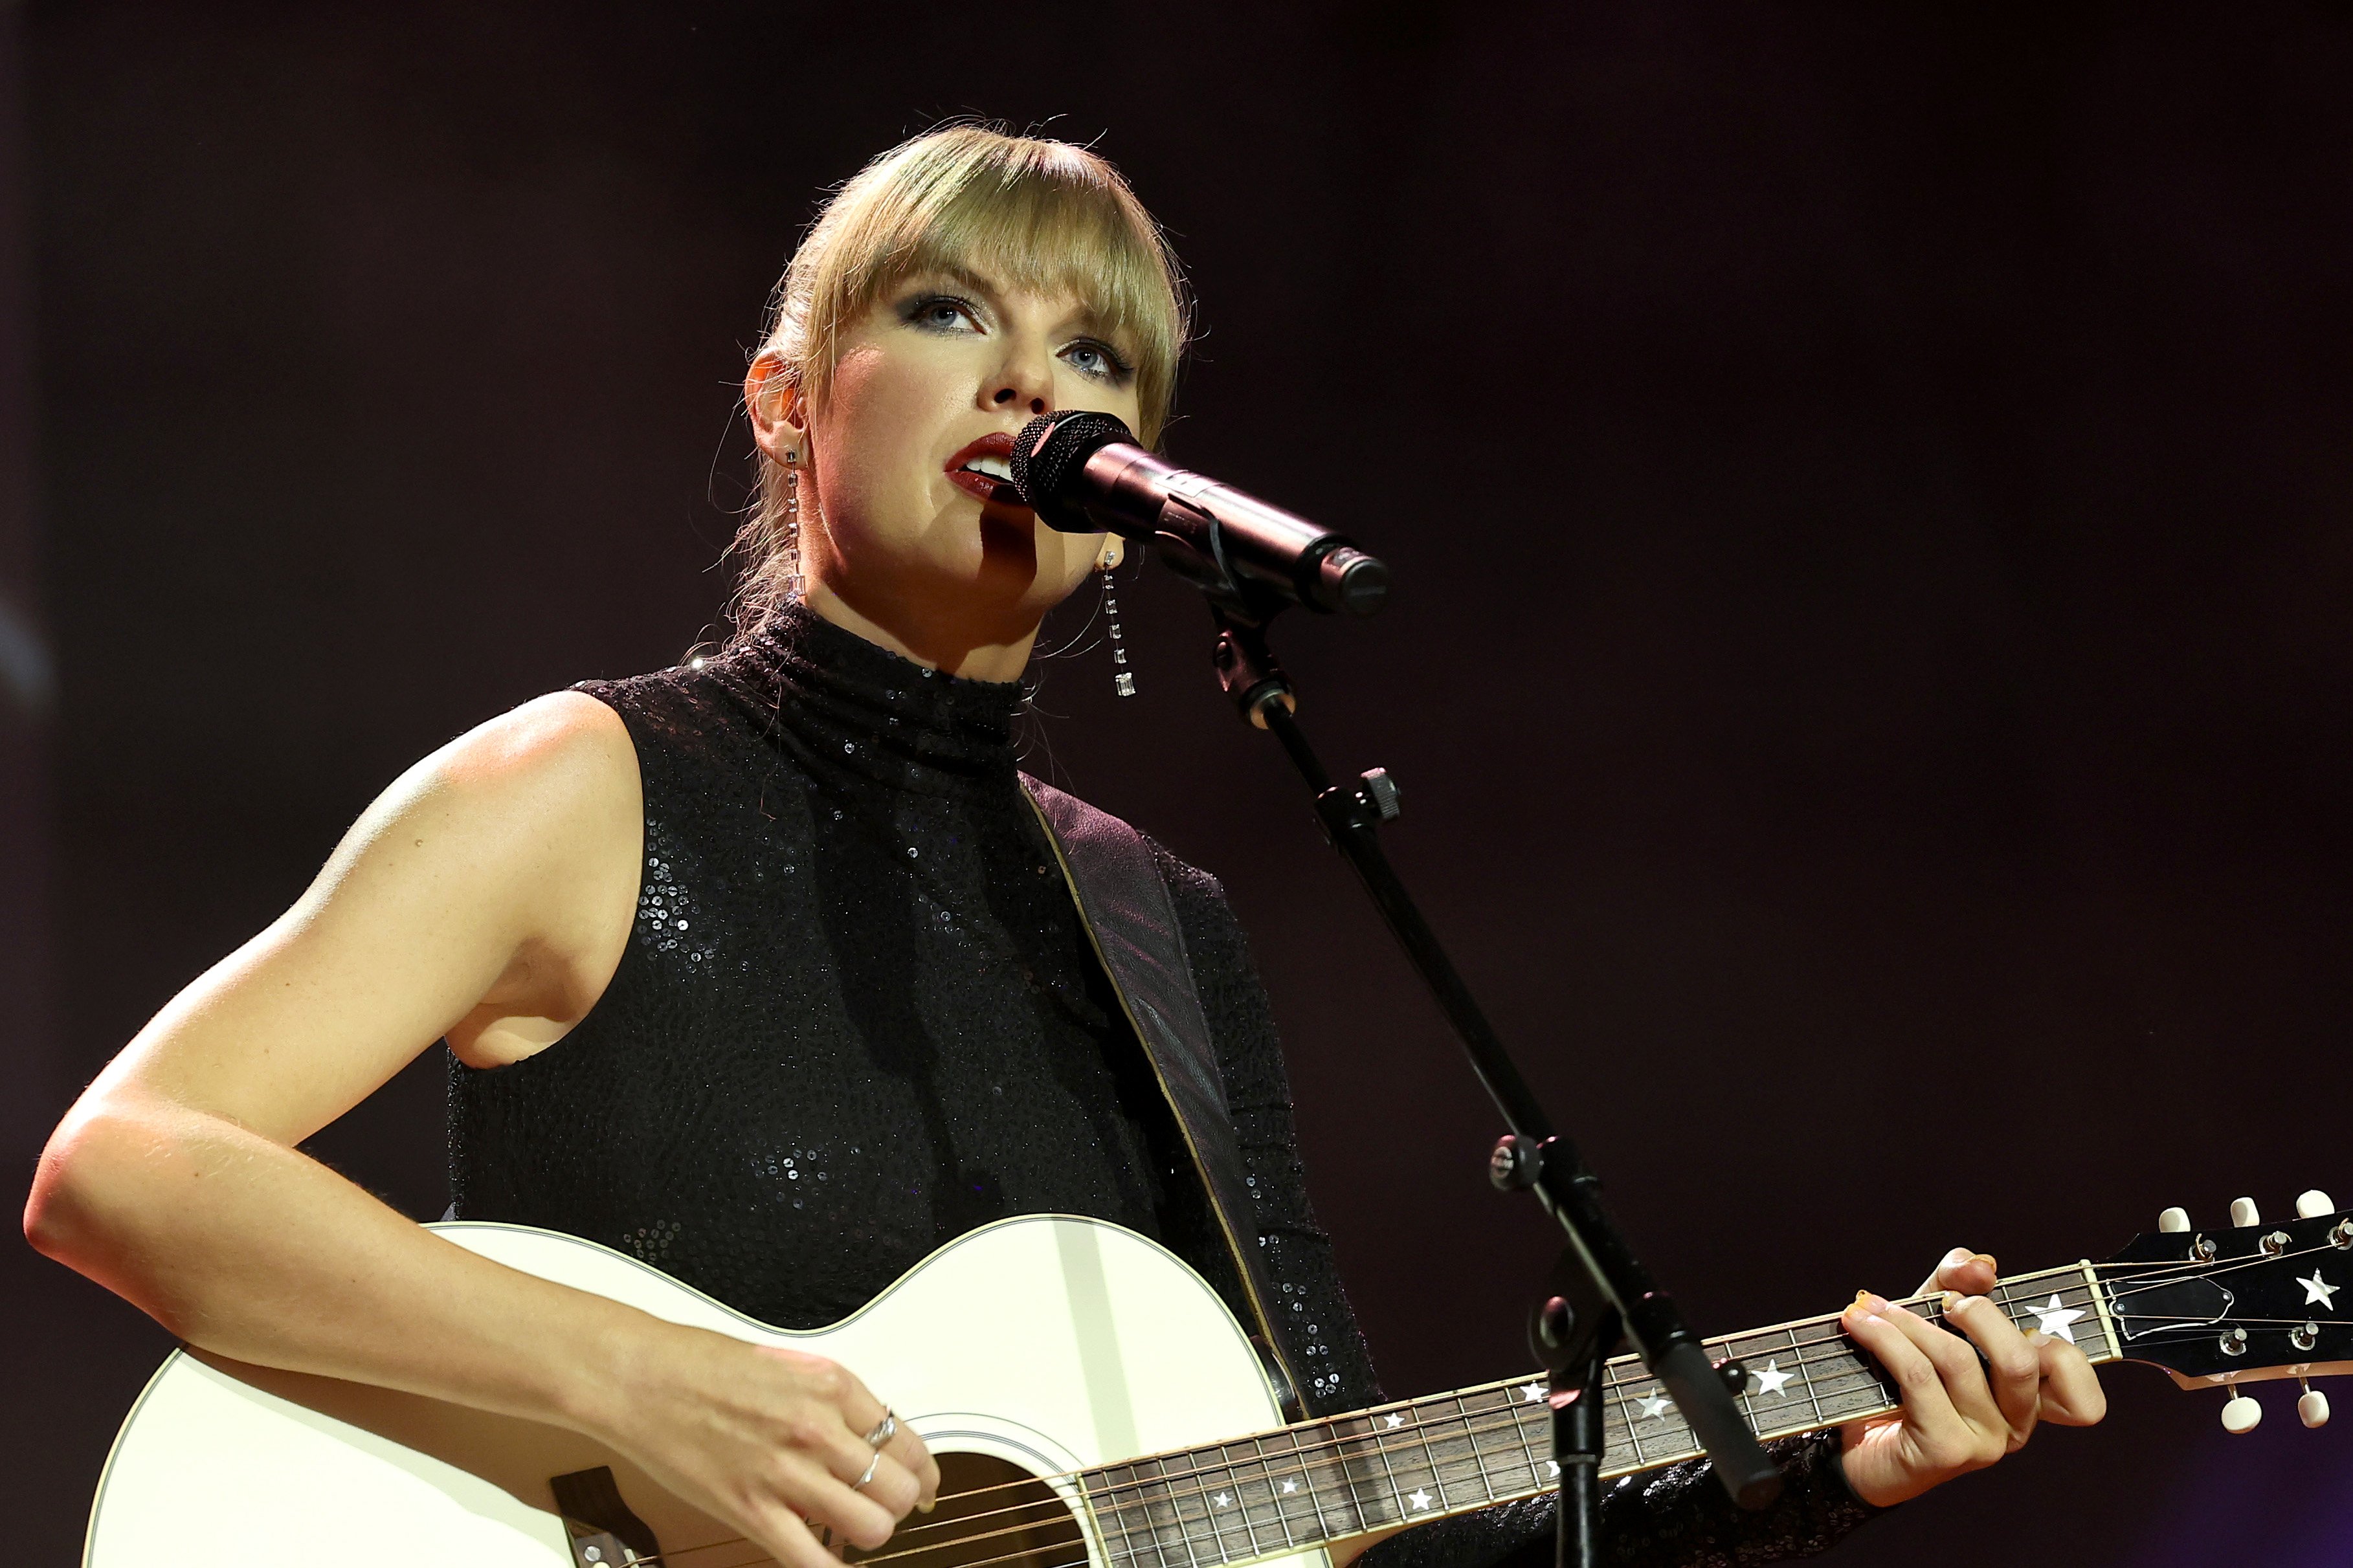 Taylor Swift performs on stage with a white acoustic guitar